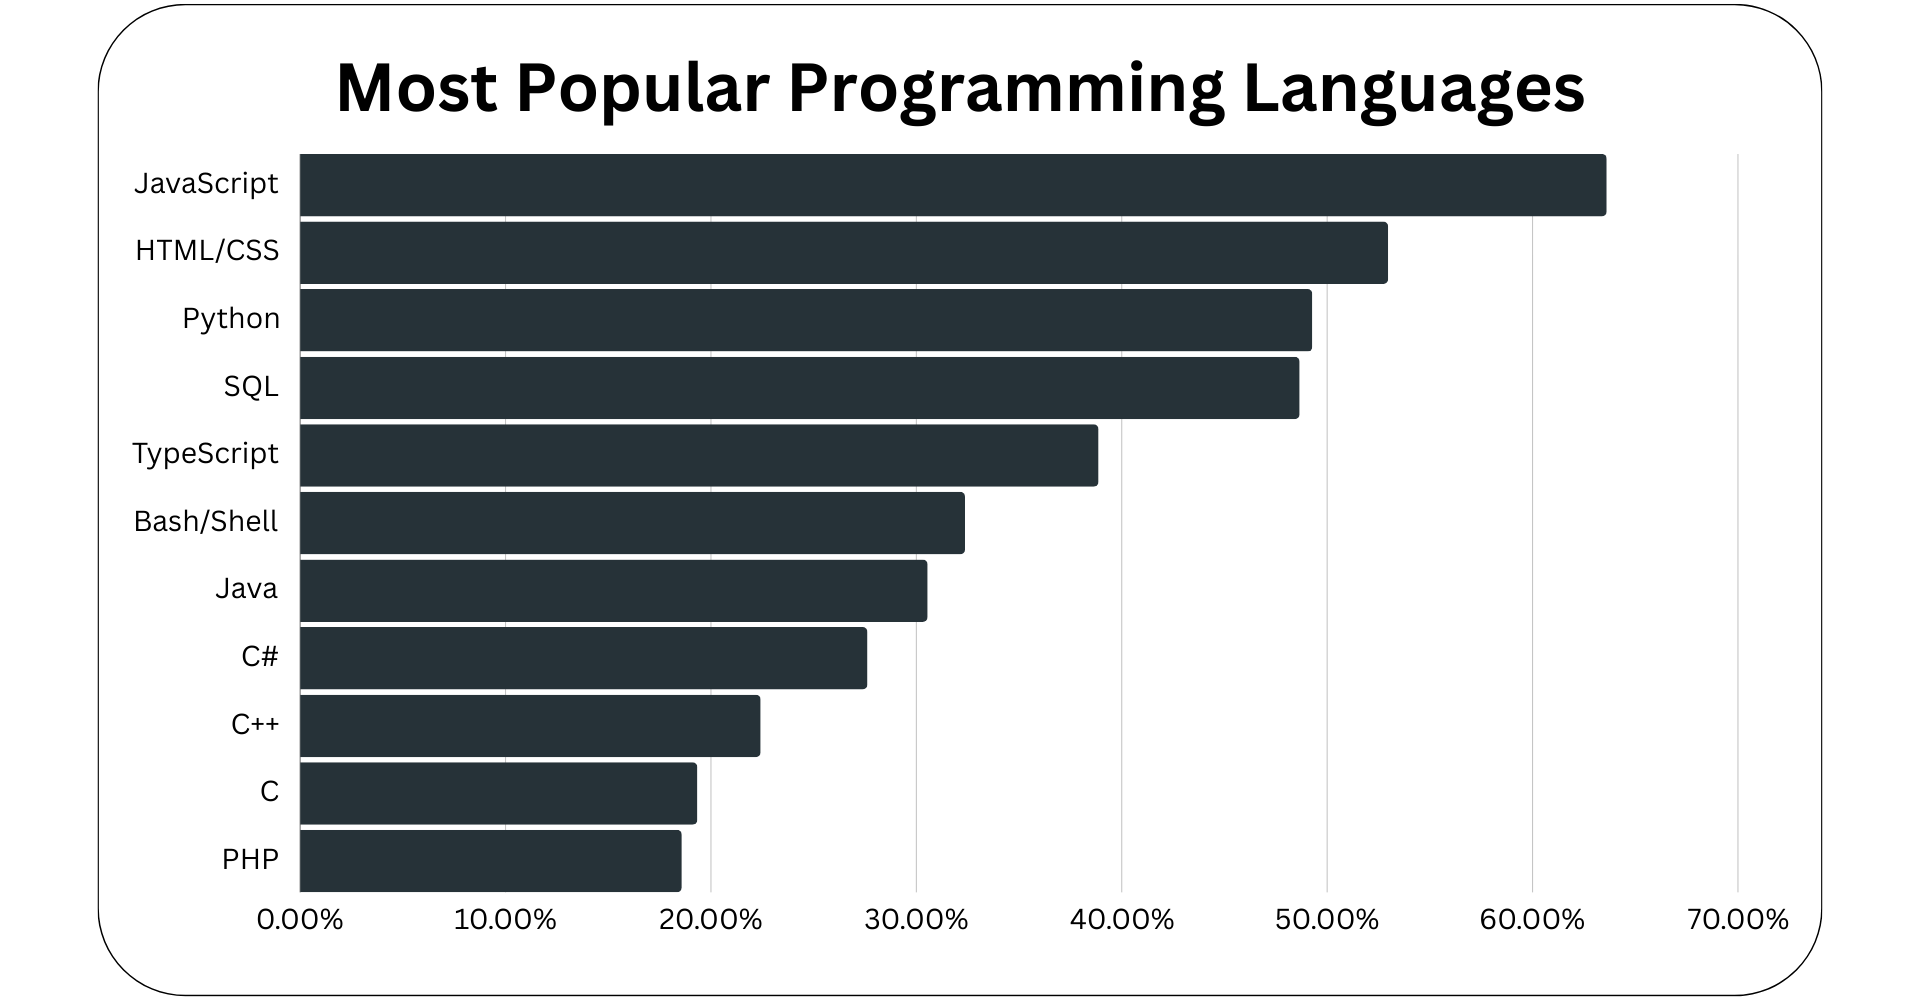 Bar chart showcasing the most popular programming languages according to the Stack Overflow survey